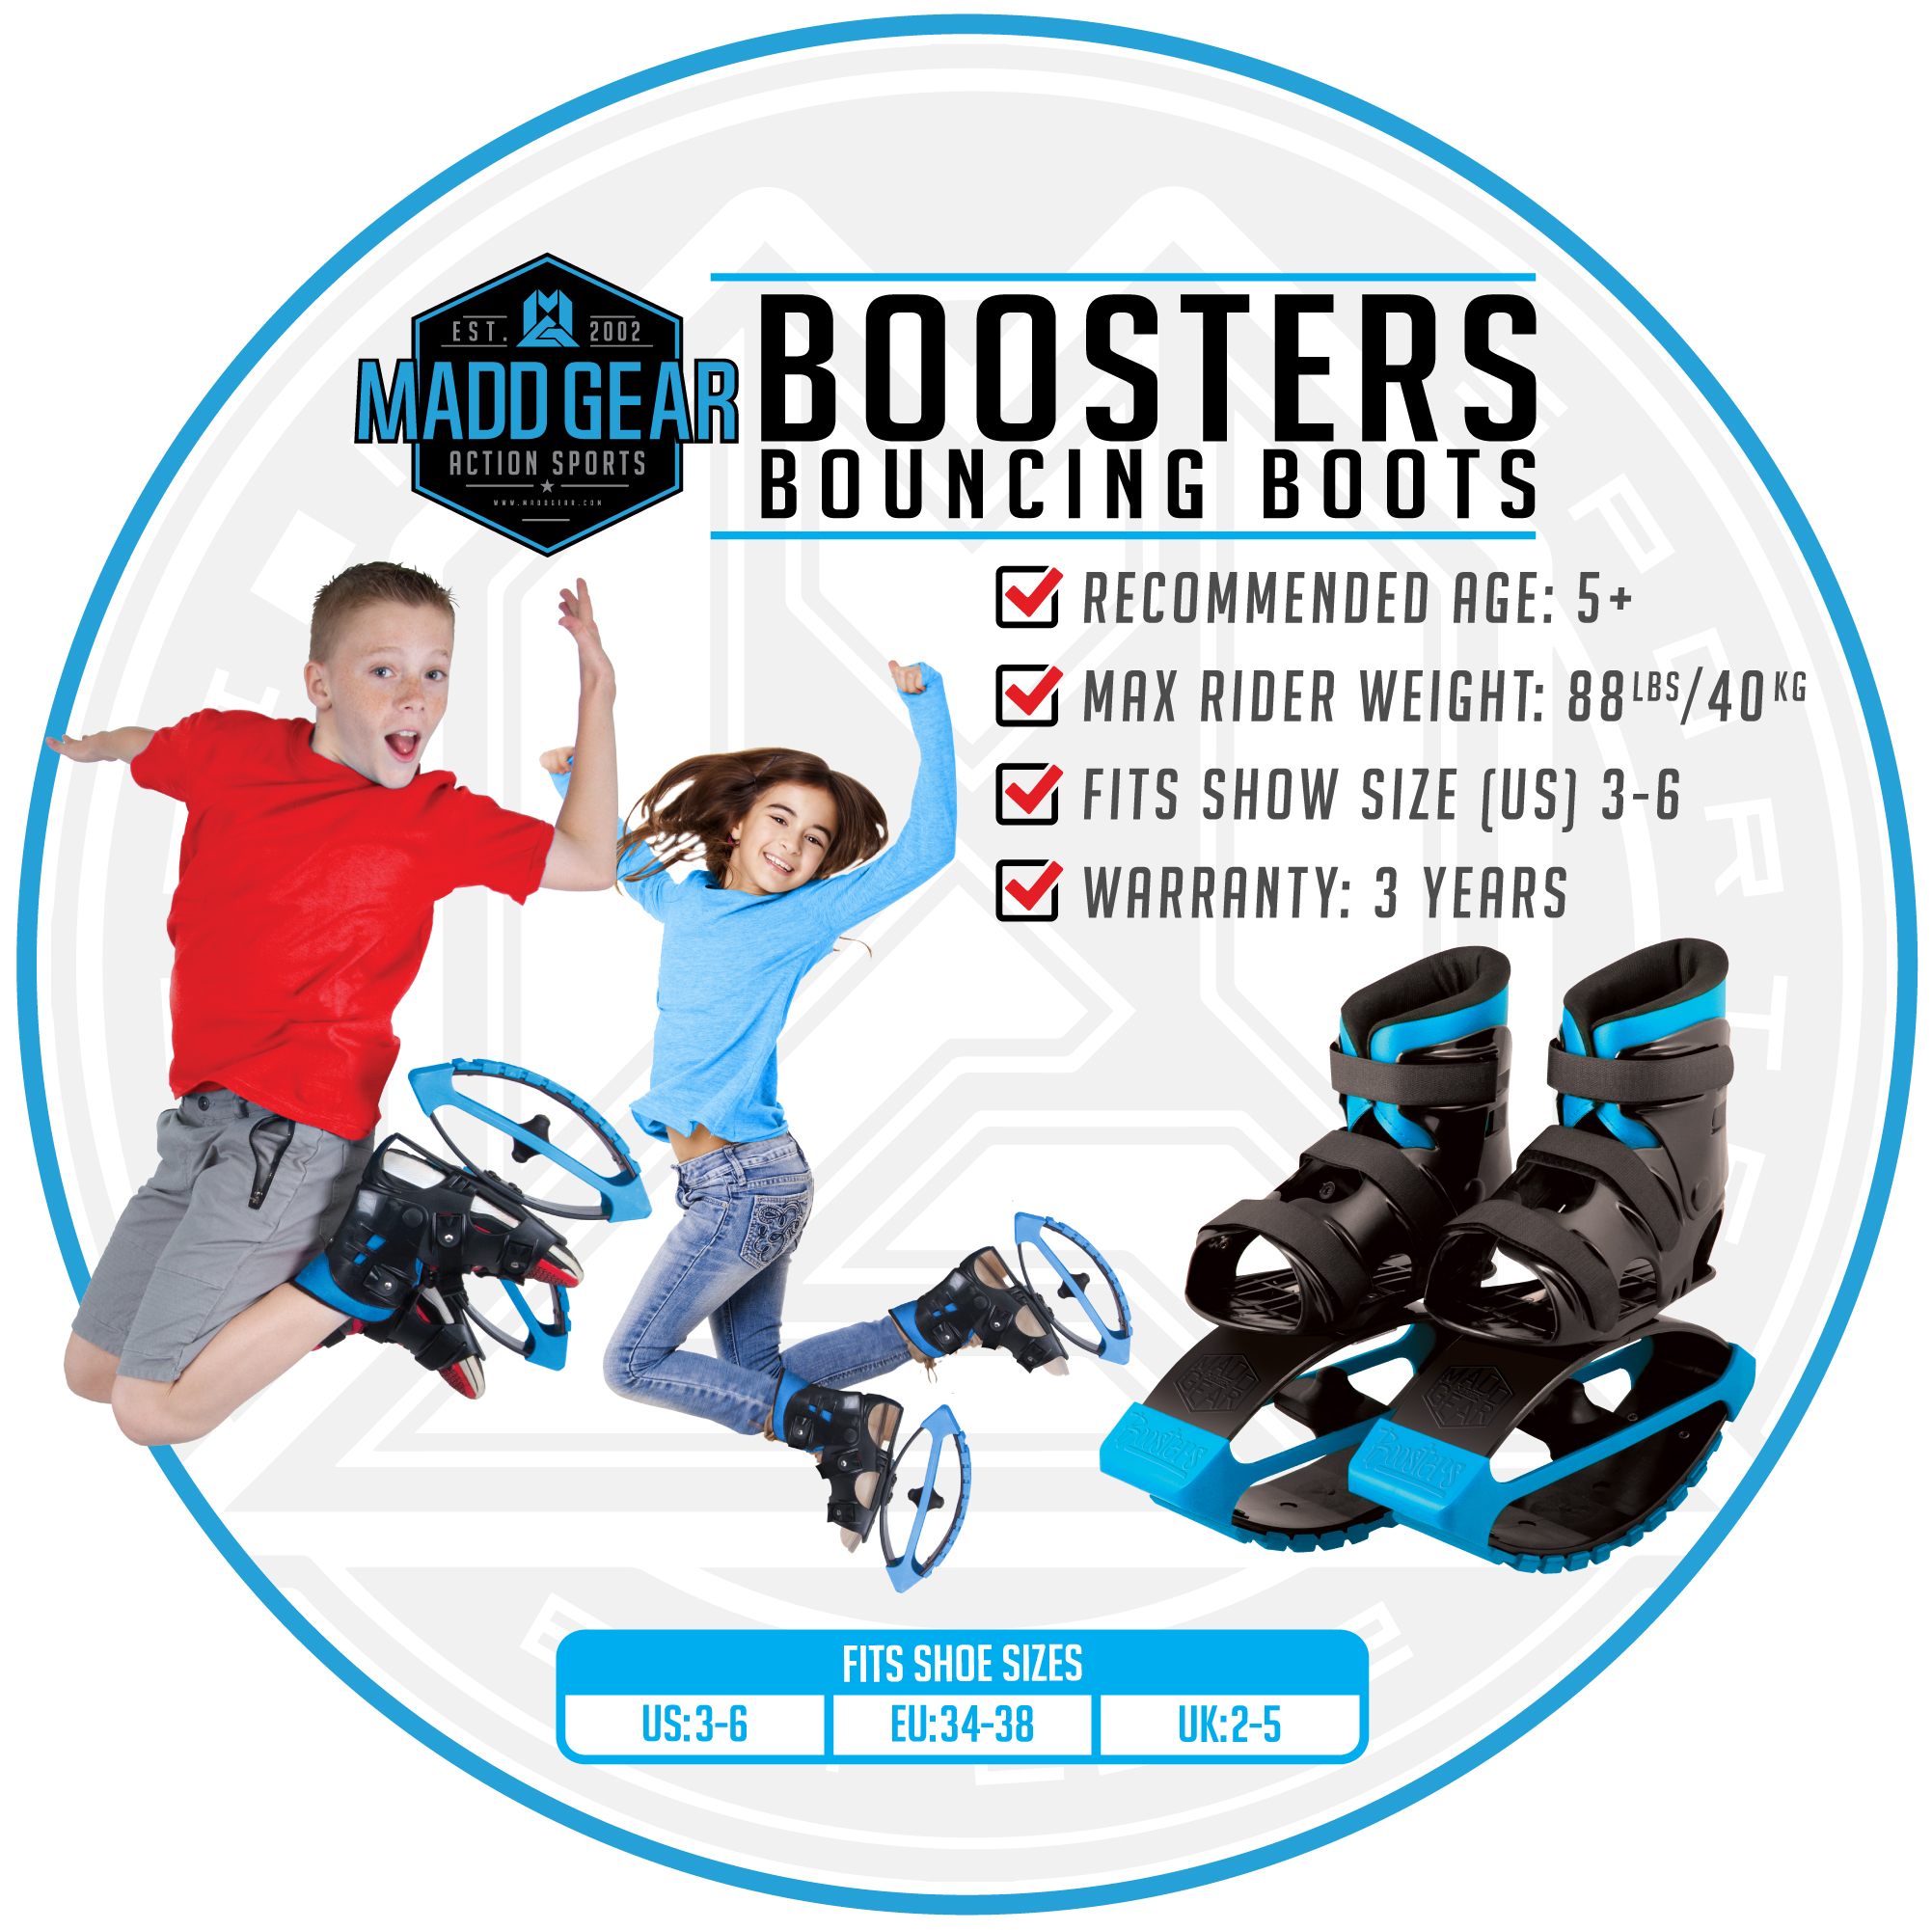 MGP Action Sports – BOOST BOOTS – Kids Jumping Shoes – Black Blue – Suites Boys & Girls Ages 5+ - Max User Weight 88lbs – 3 Year Manufacturer’s Warranty - image 2 of 9